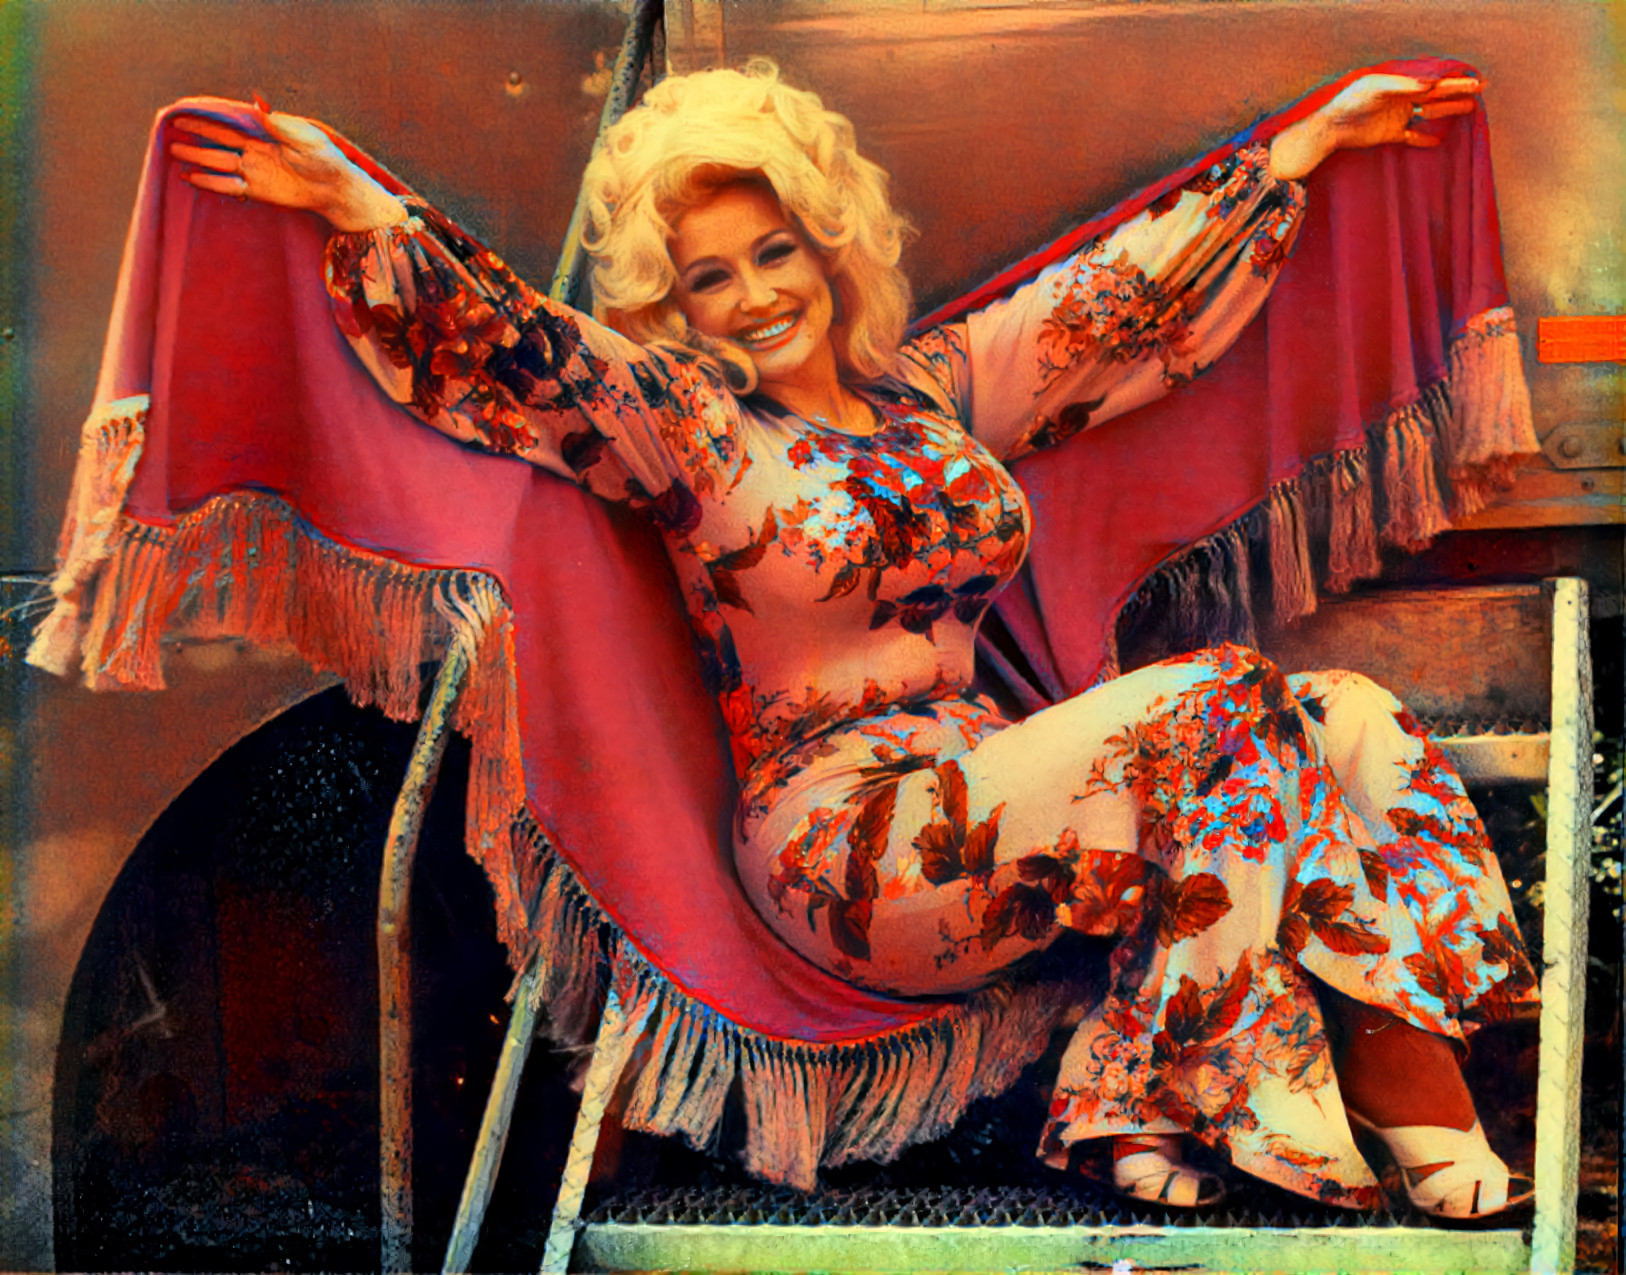 Deep Dream inspired by Dolly Parton being Dolly.